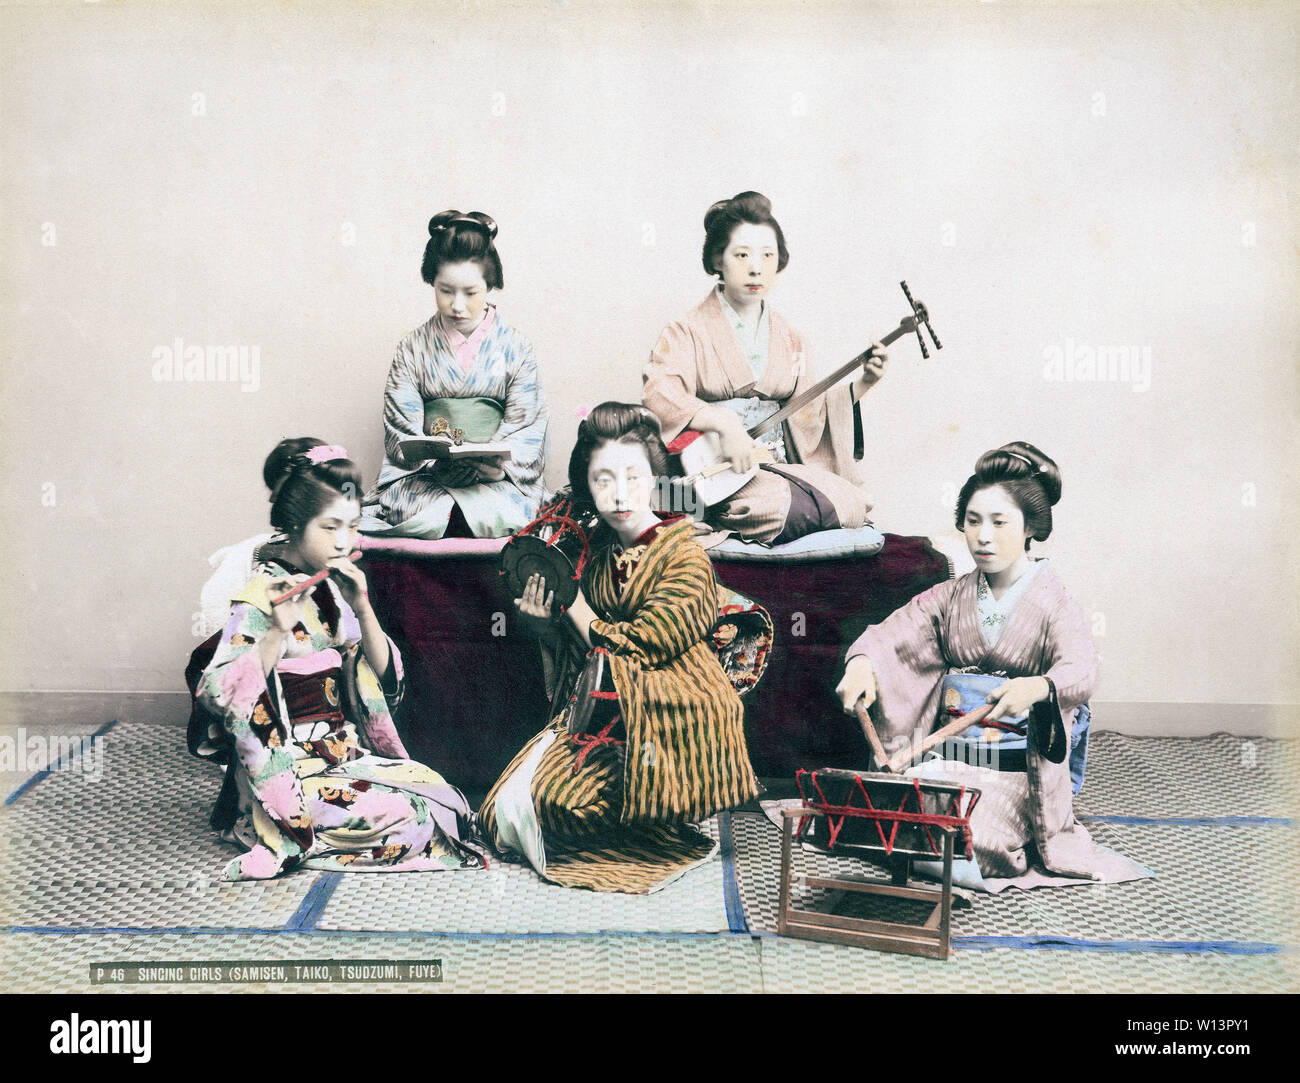 [ 1890s Japan - Maiko Playing Music ] —   Maiko in kimono and traditional hairstyles are practicing singing as well as playing tsutsumi (also tsuzumi) shoulder drums, shamisen, a three-stringed musical instrument, a taiko drum known as ootsutsumi and a fue flute.  19th century vintage albumen photograph. Stock Photo